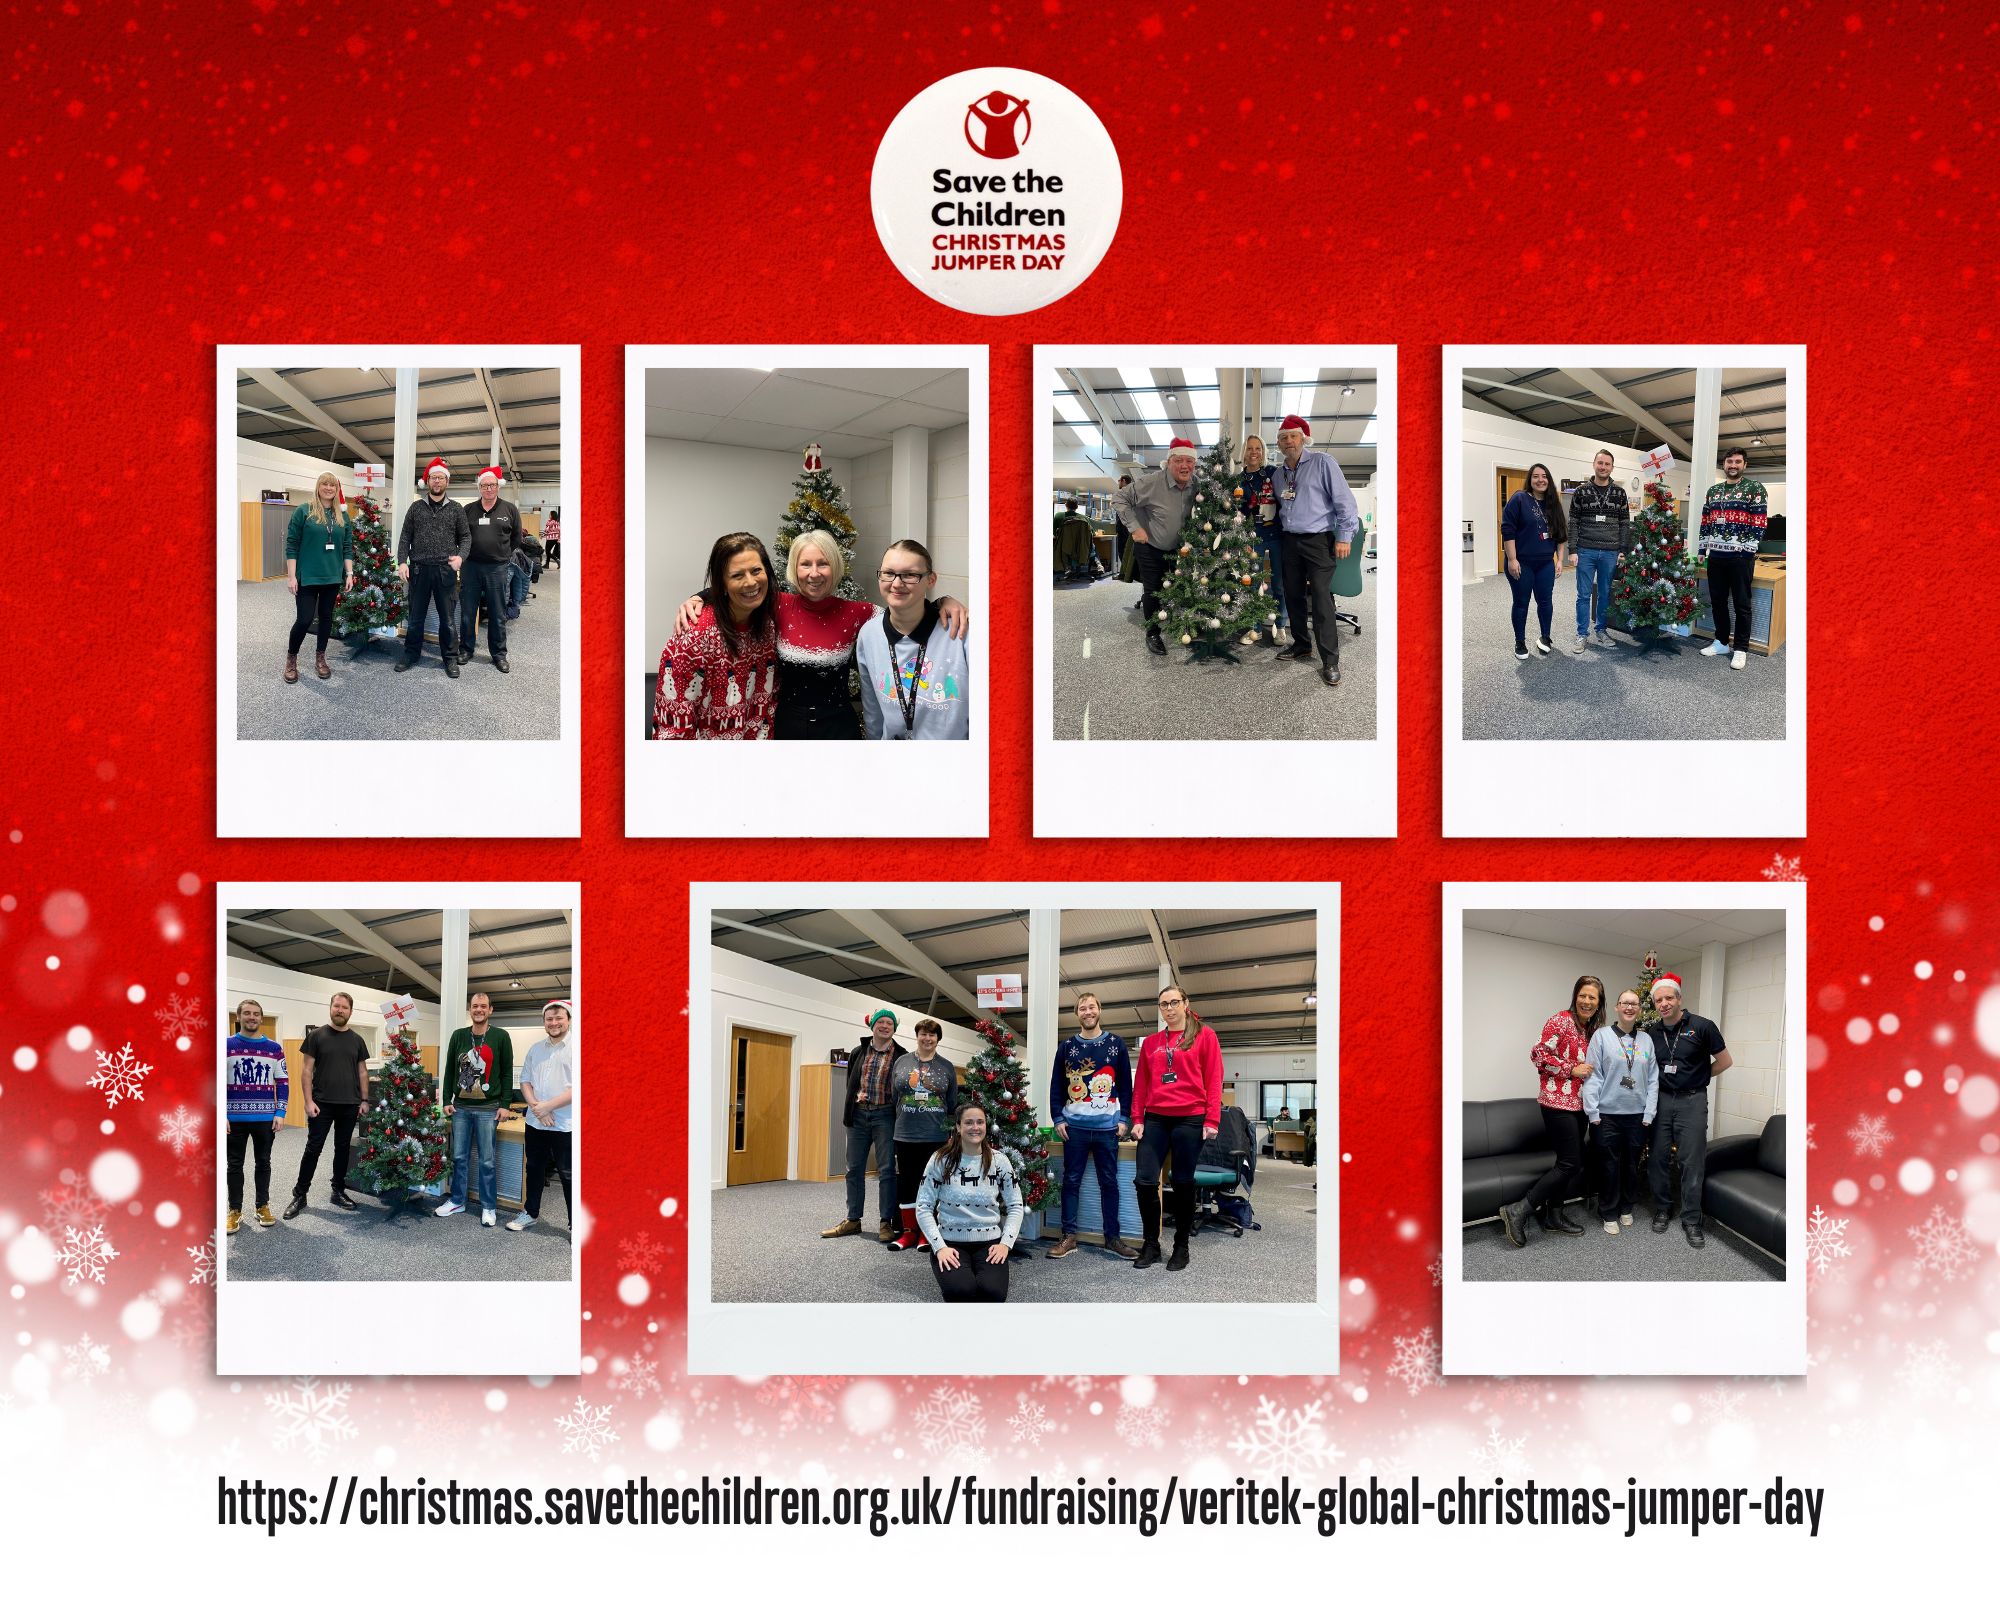 Veritek is taking part in Christmas Jumper Day to raise money for Save The Children